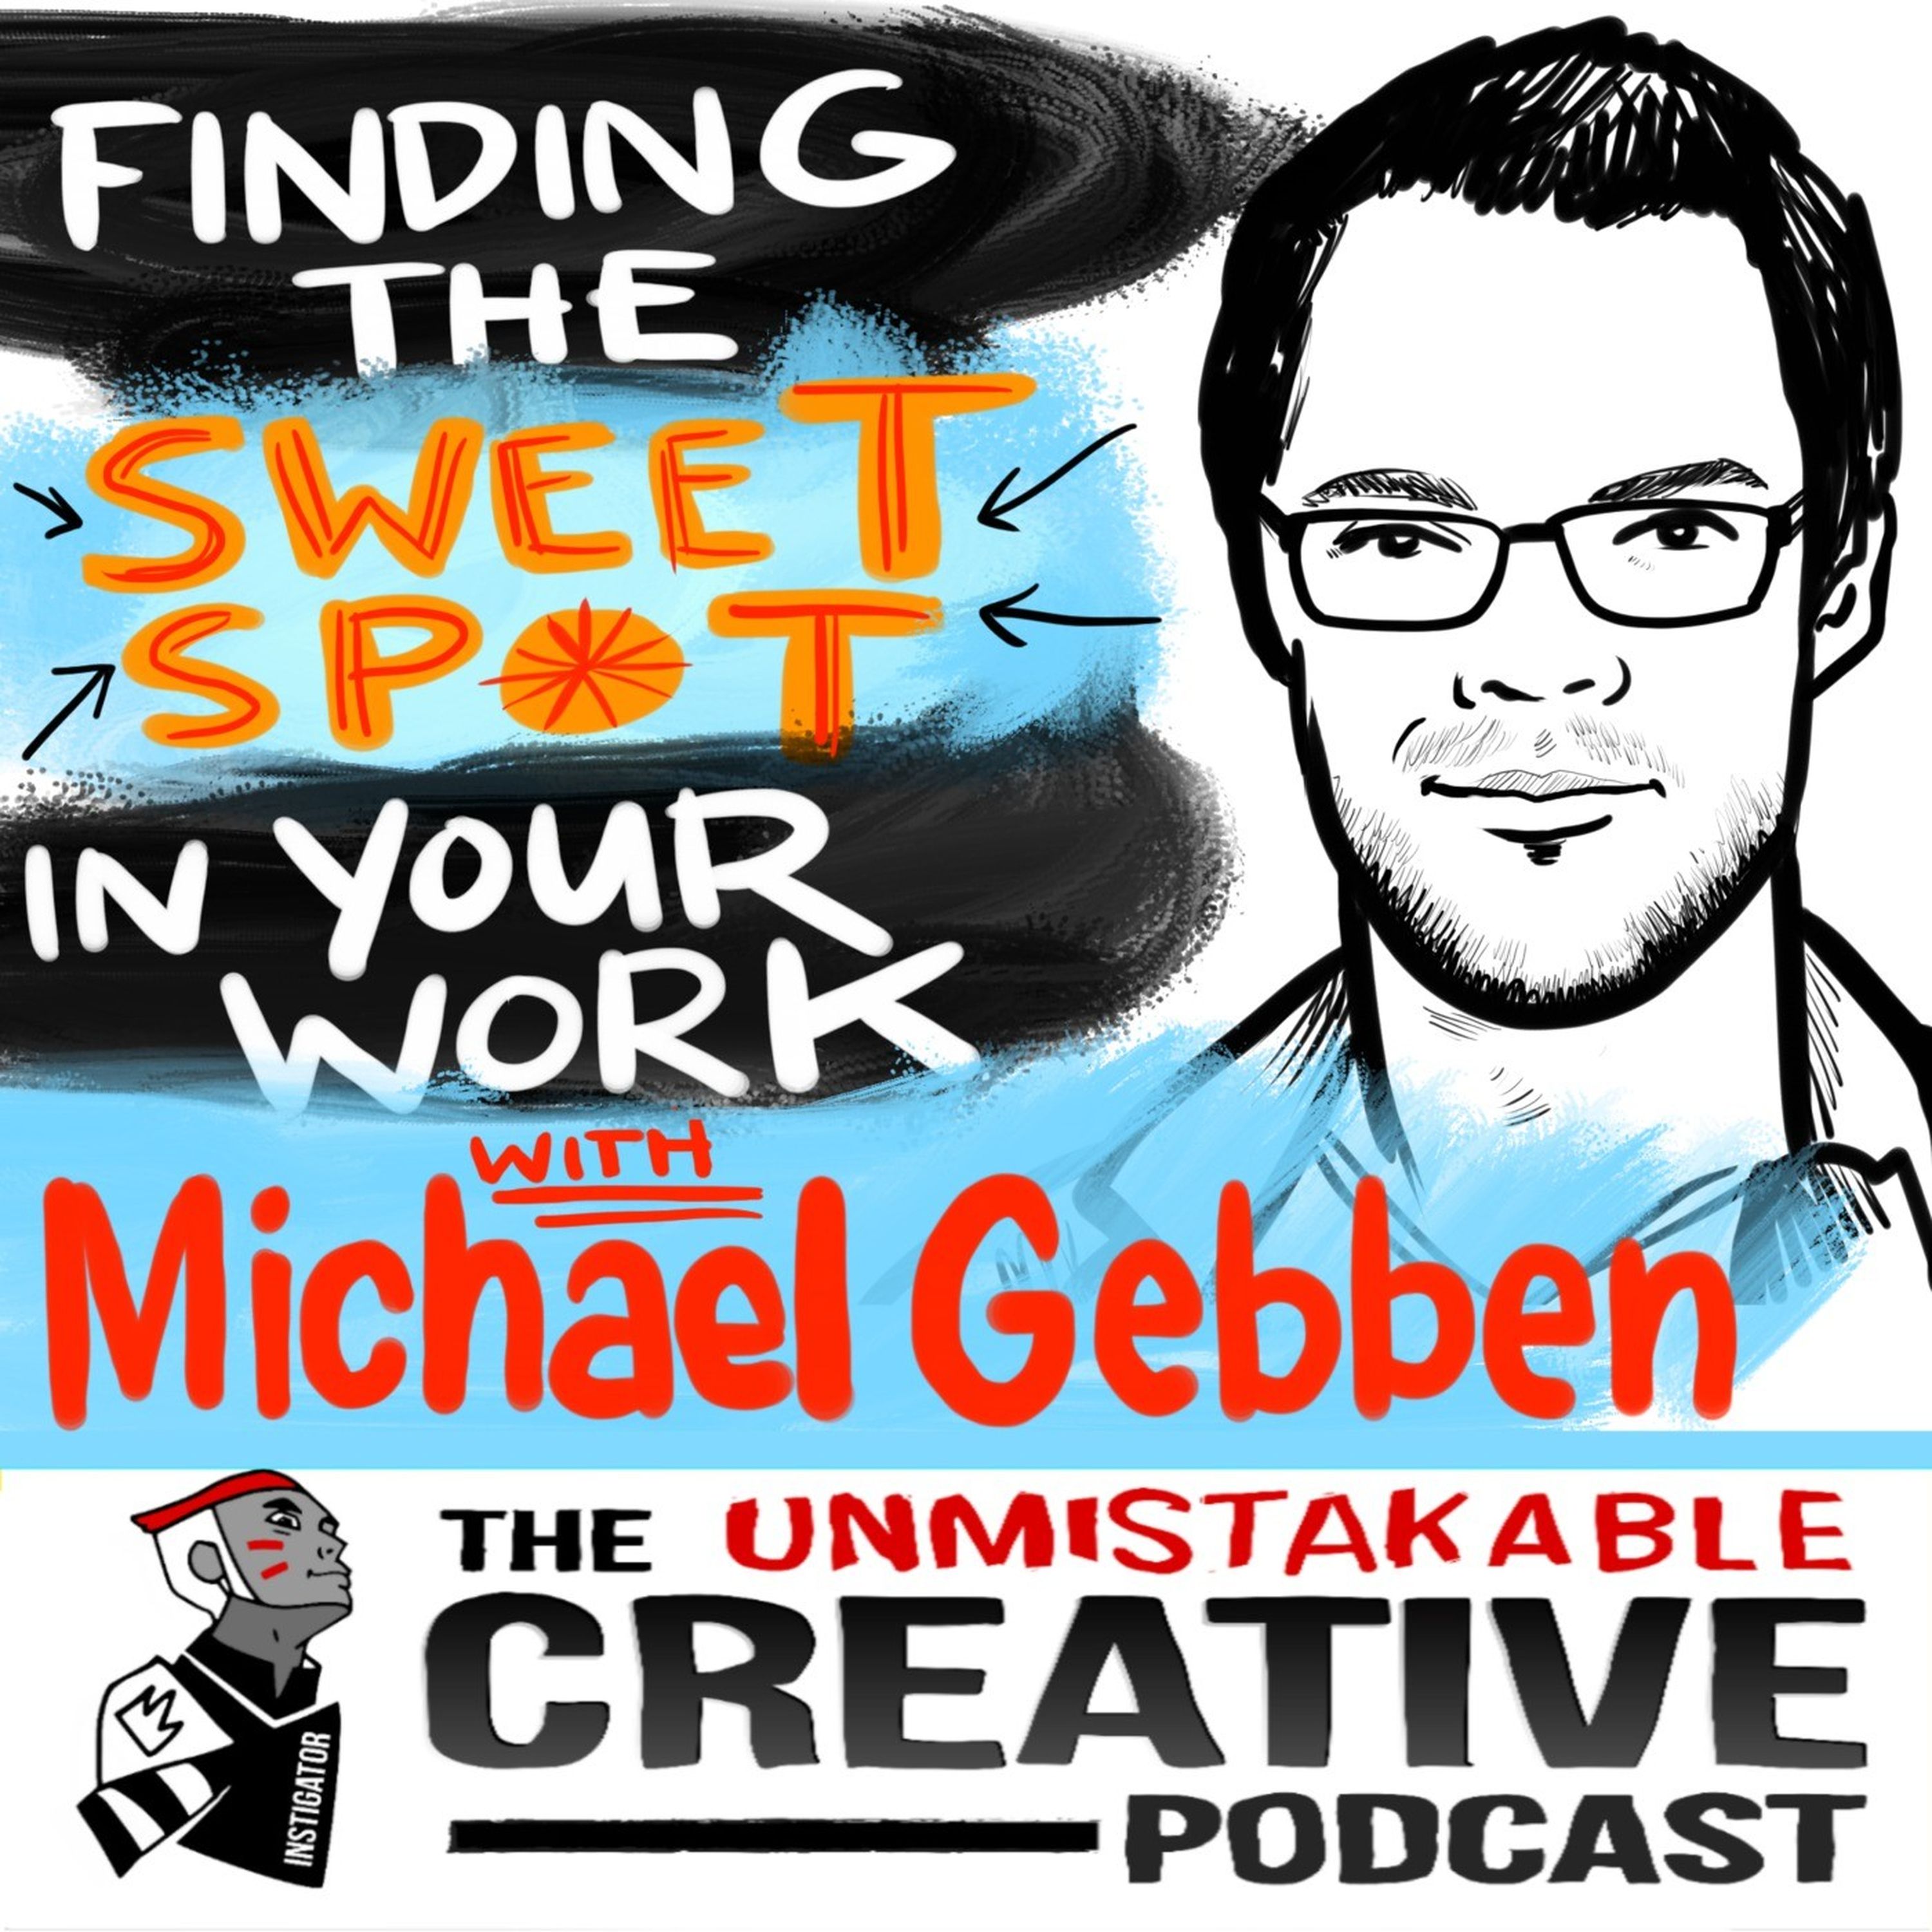 Finding The Sweet Spot in Your Work with Michael Gebben Image